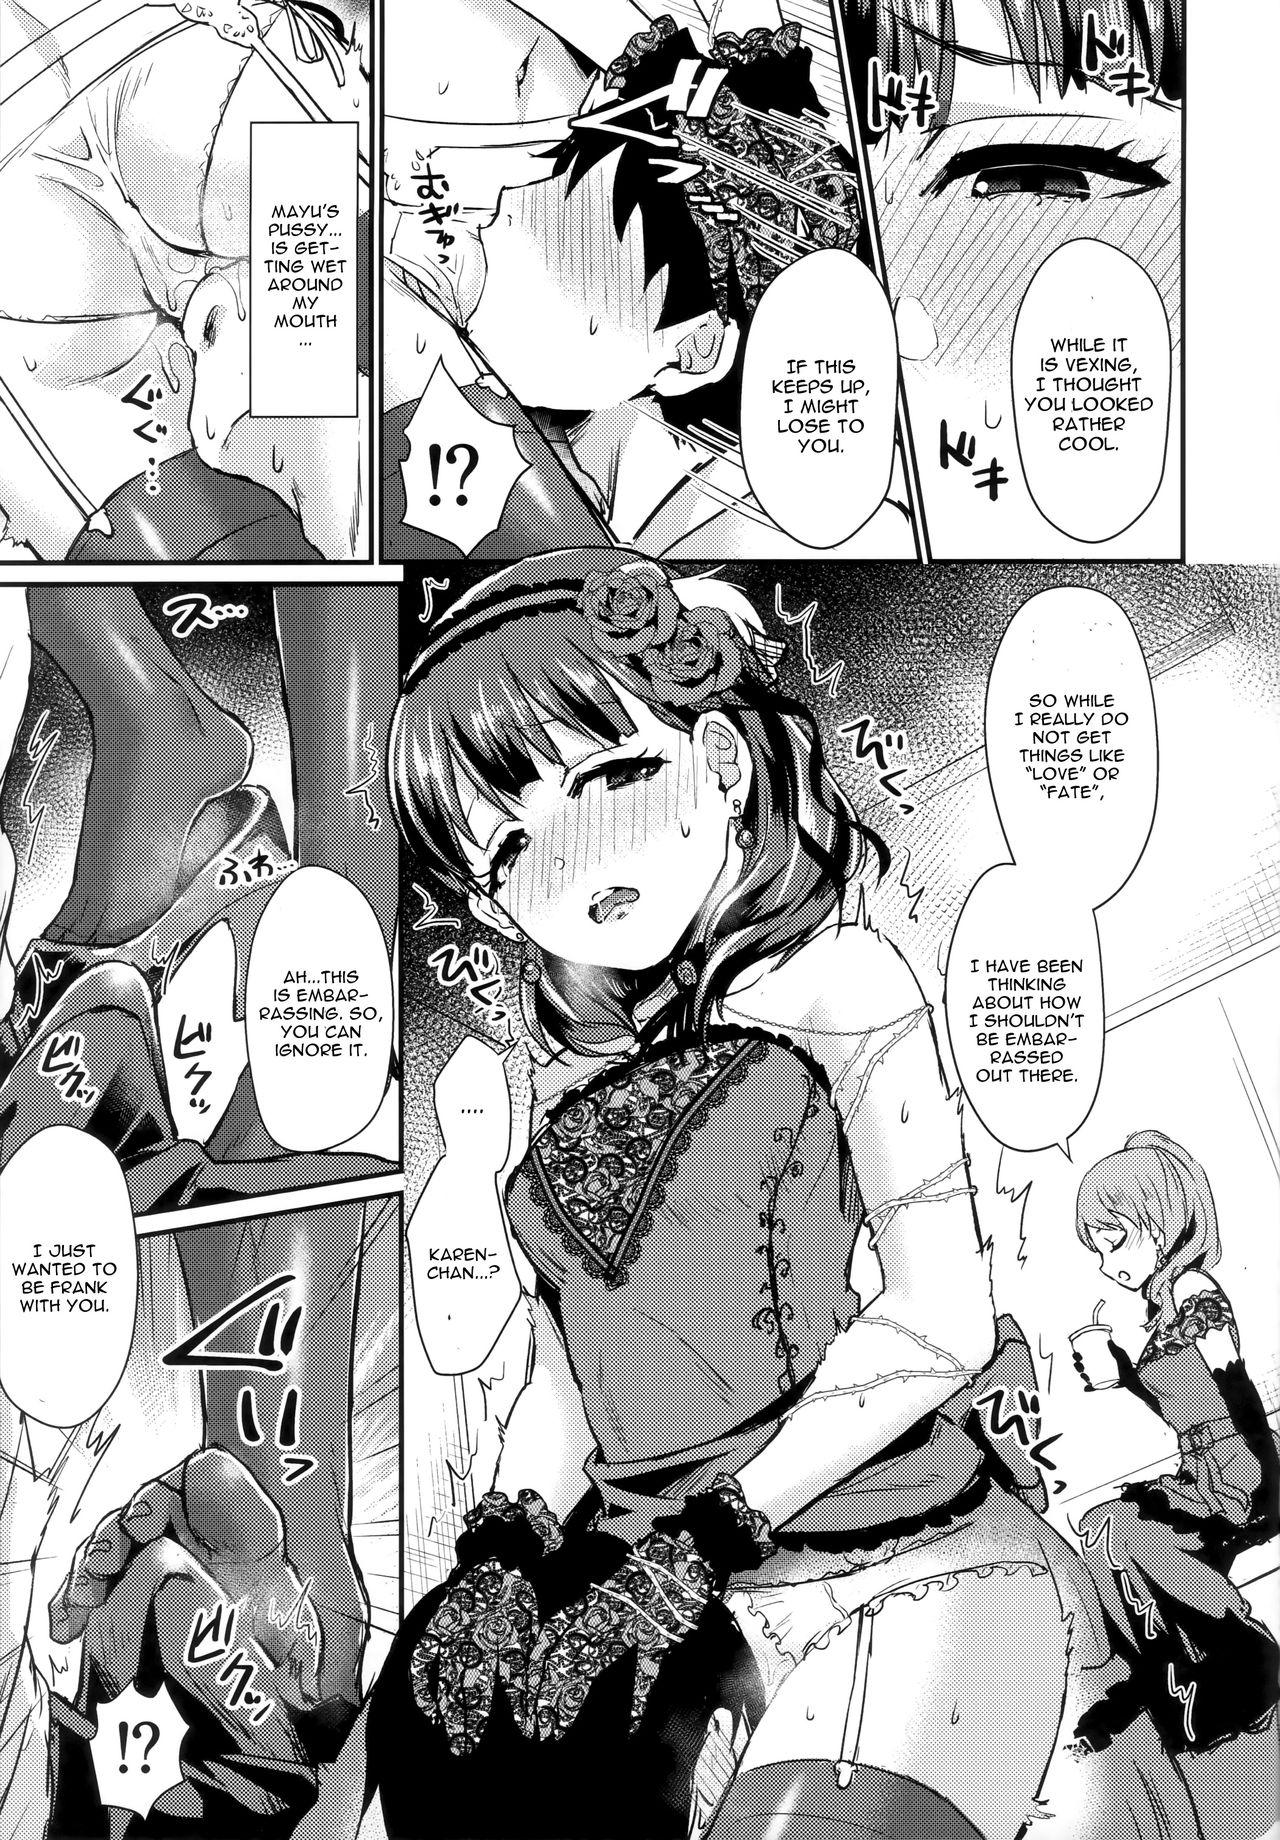 Spy Camera Don't stop my pure love - The idolmaster Tiny Tits Porn - Page 10